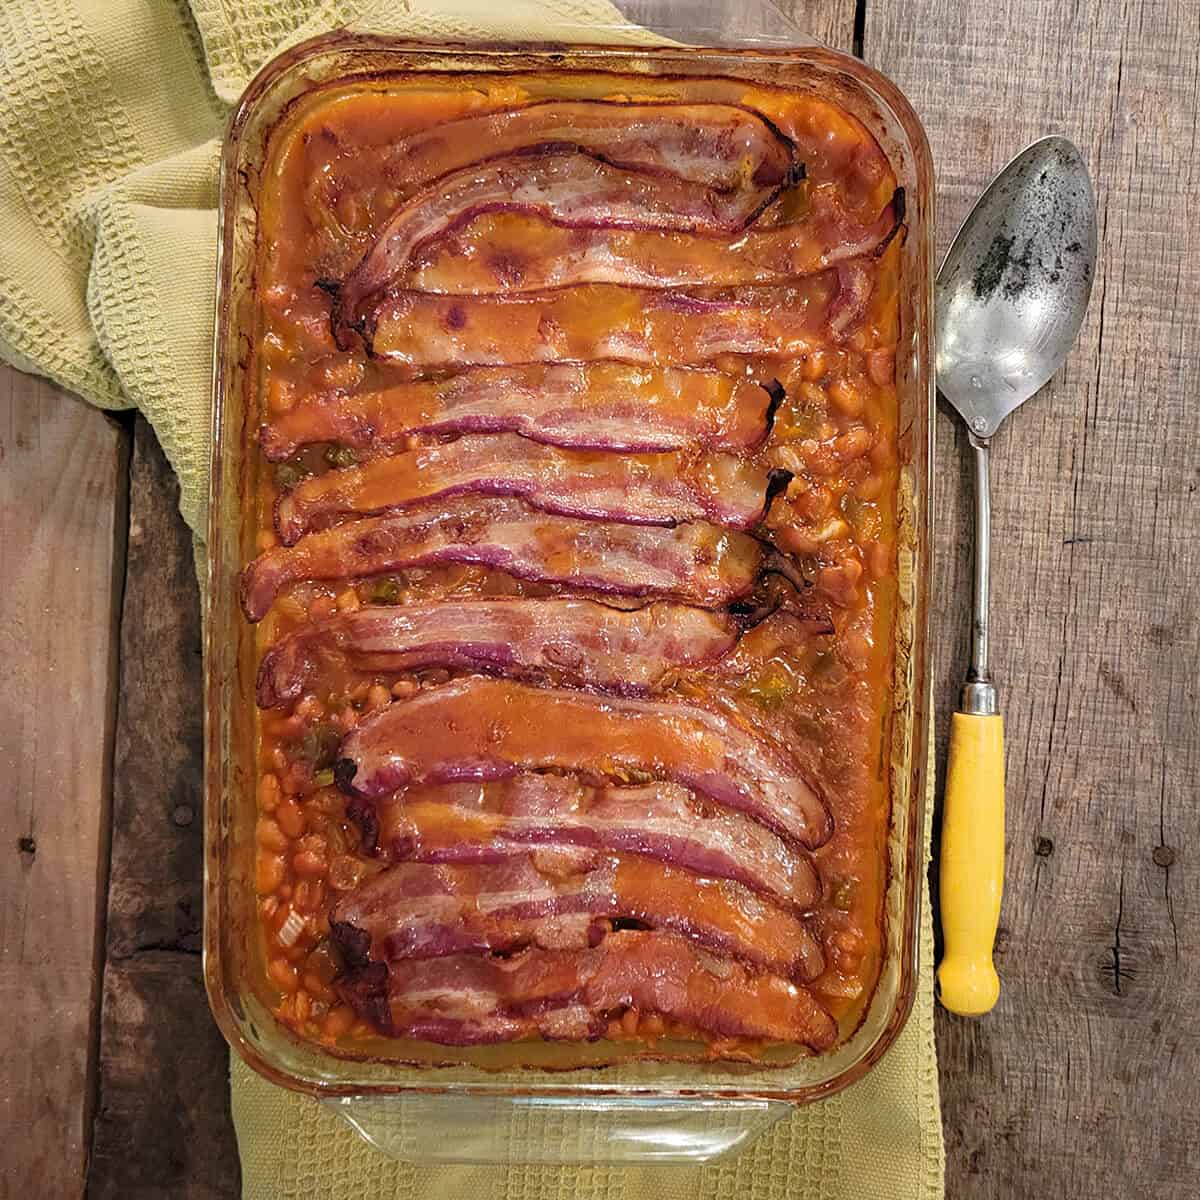 Cooked baked beans in a casserole dish on a wooden board.